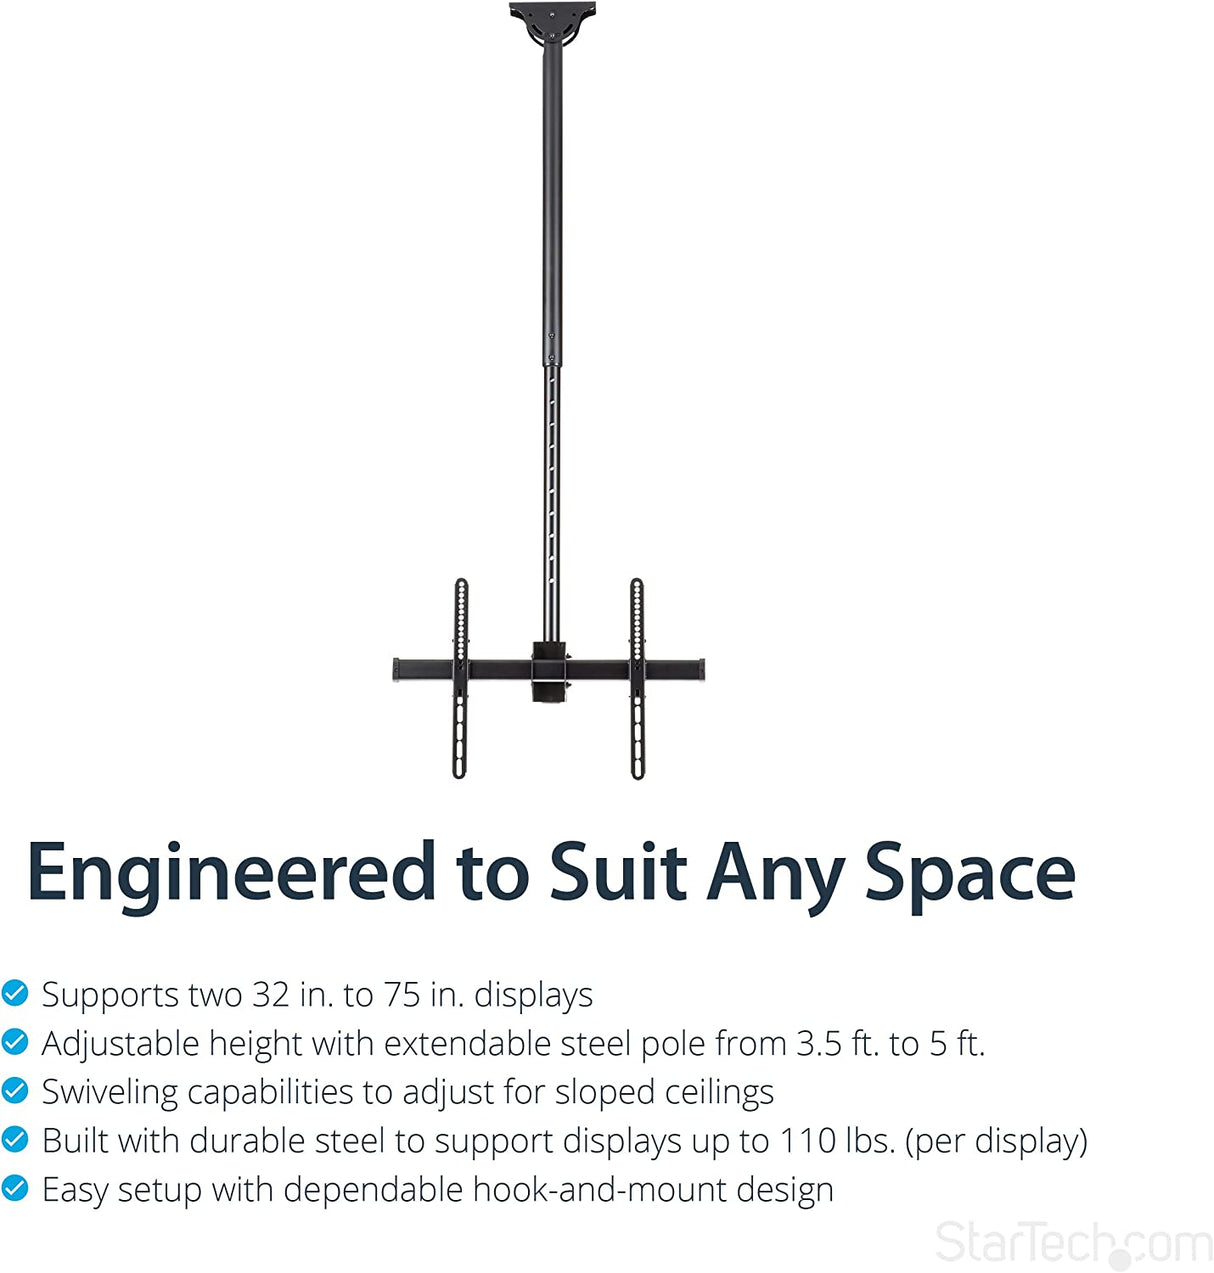 StarTech.com Ceiling TV Mount - 3.5' to 5' Pole - Full Motion - Supports Displays 32” to 75" - For VESA Mount Compatible TVs (FLATPNLCEIL)